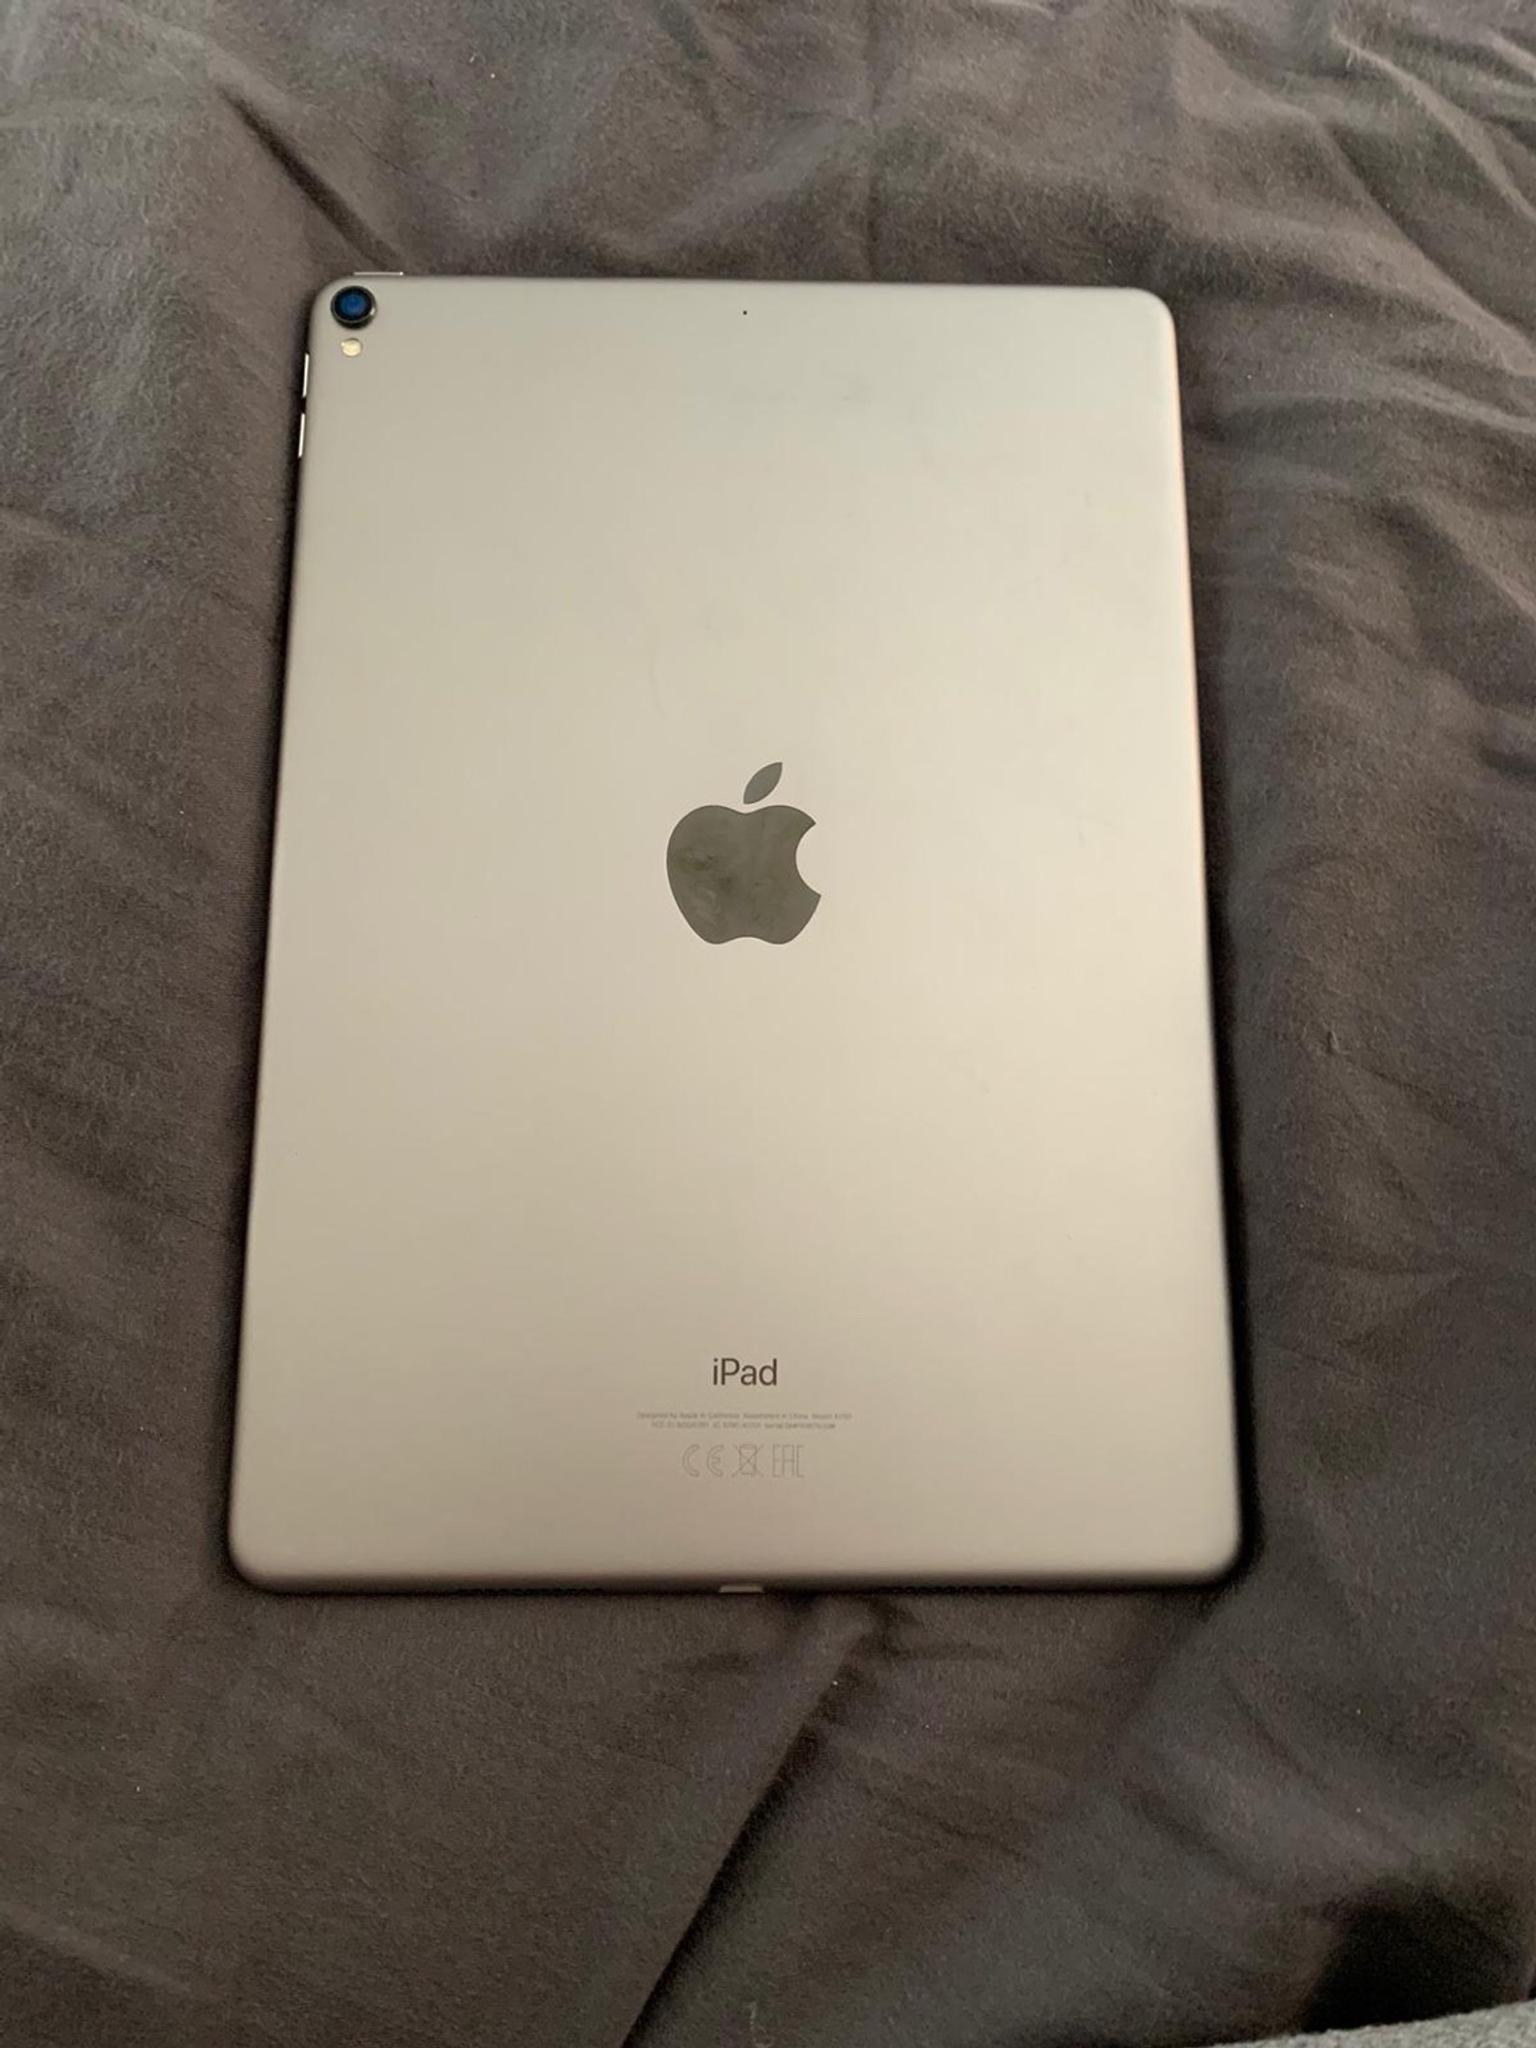 Can You Play Fortnite On Ipad 6th Generation Ipad Pro 6th Generation In Da11 Northfleet For 450 00 For Sale Shpock